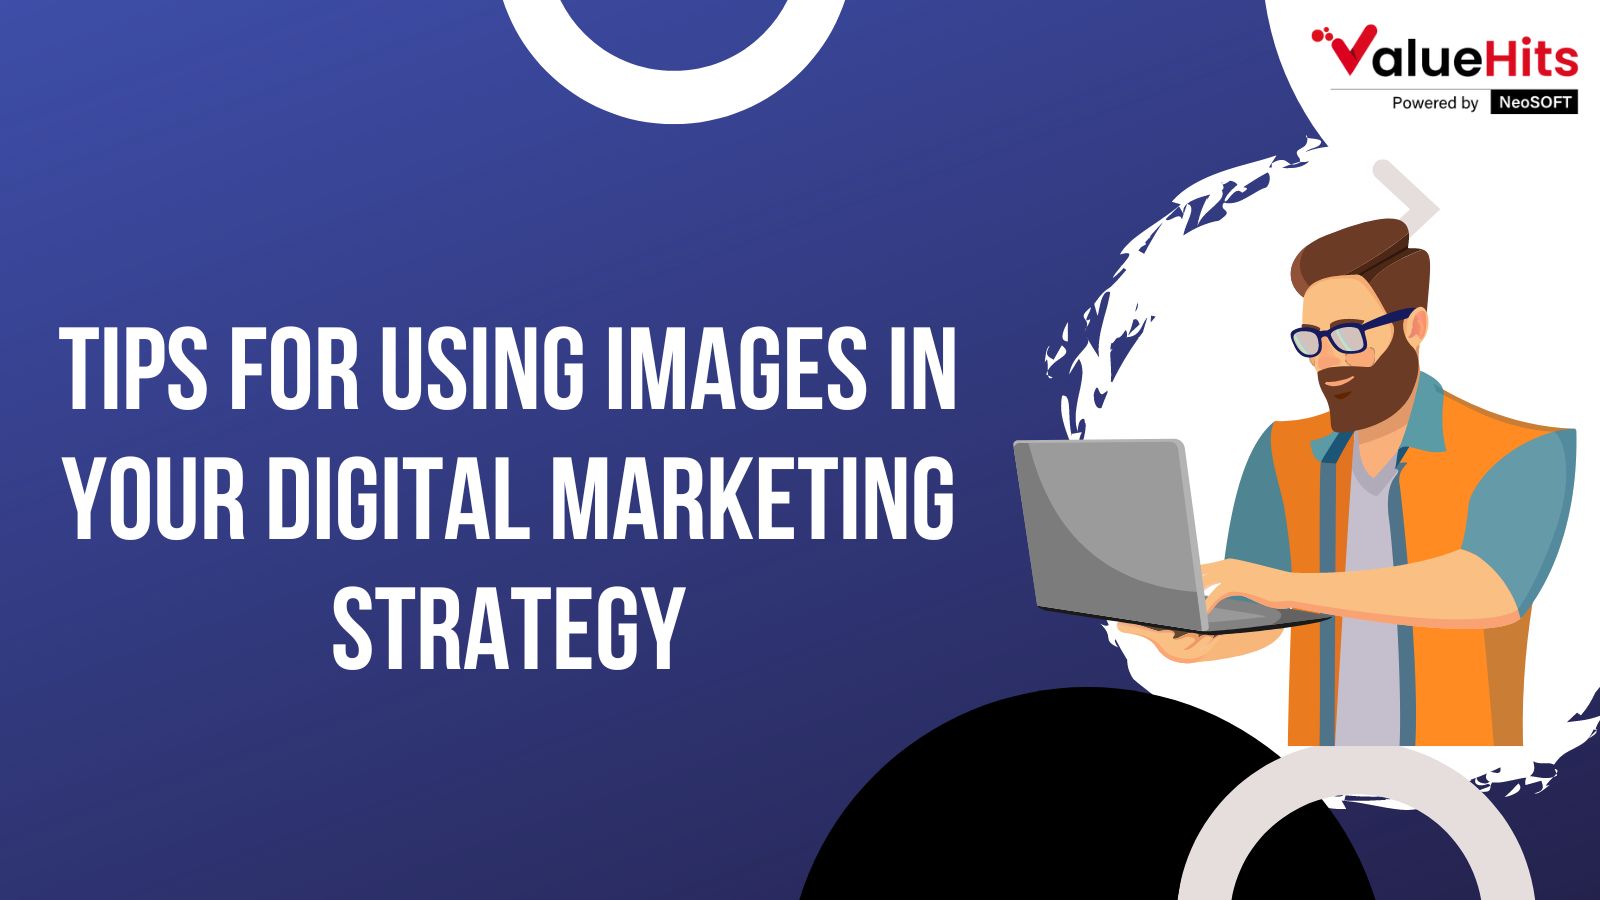 Tips for Using Images in Your Digital Marketing Strategy